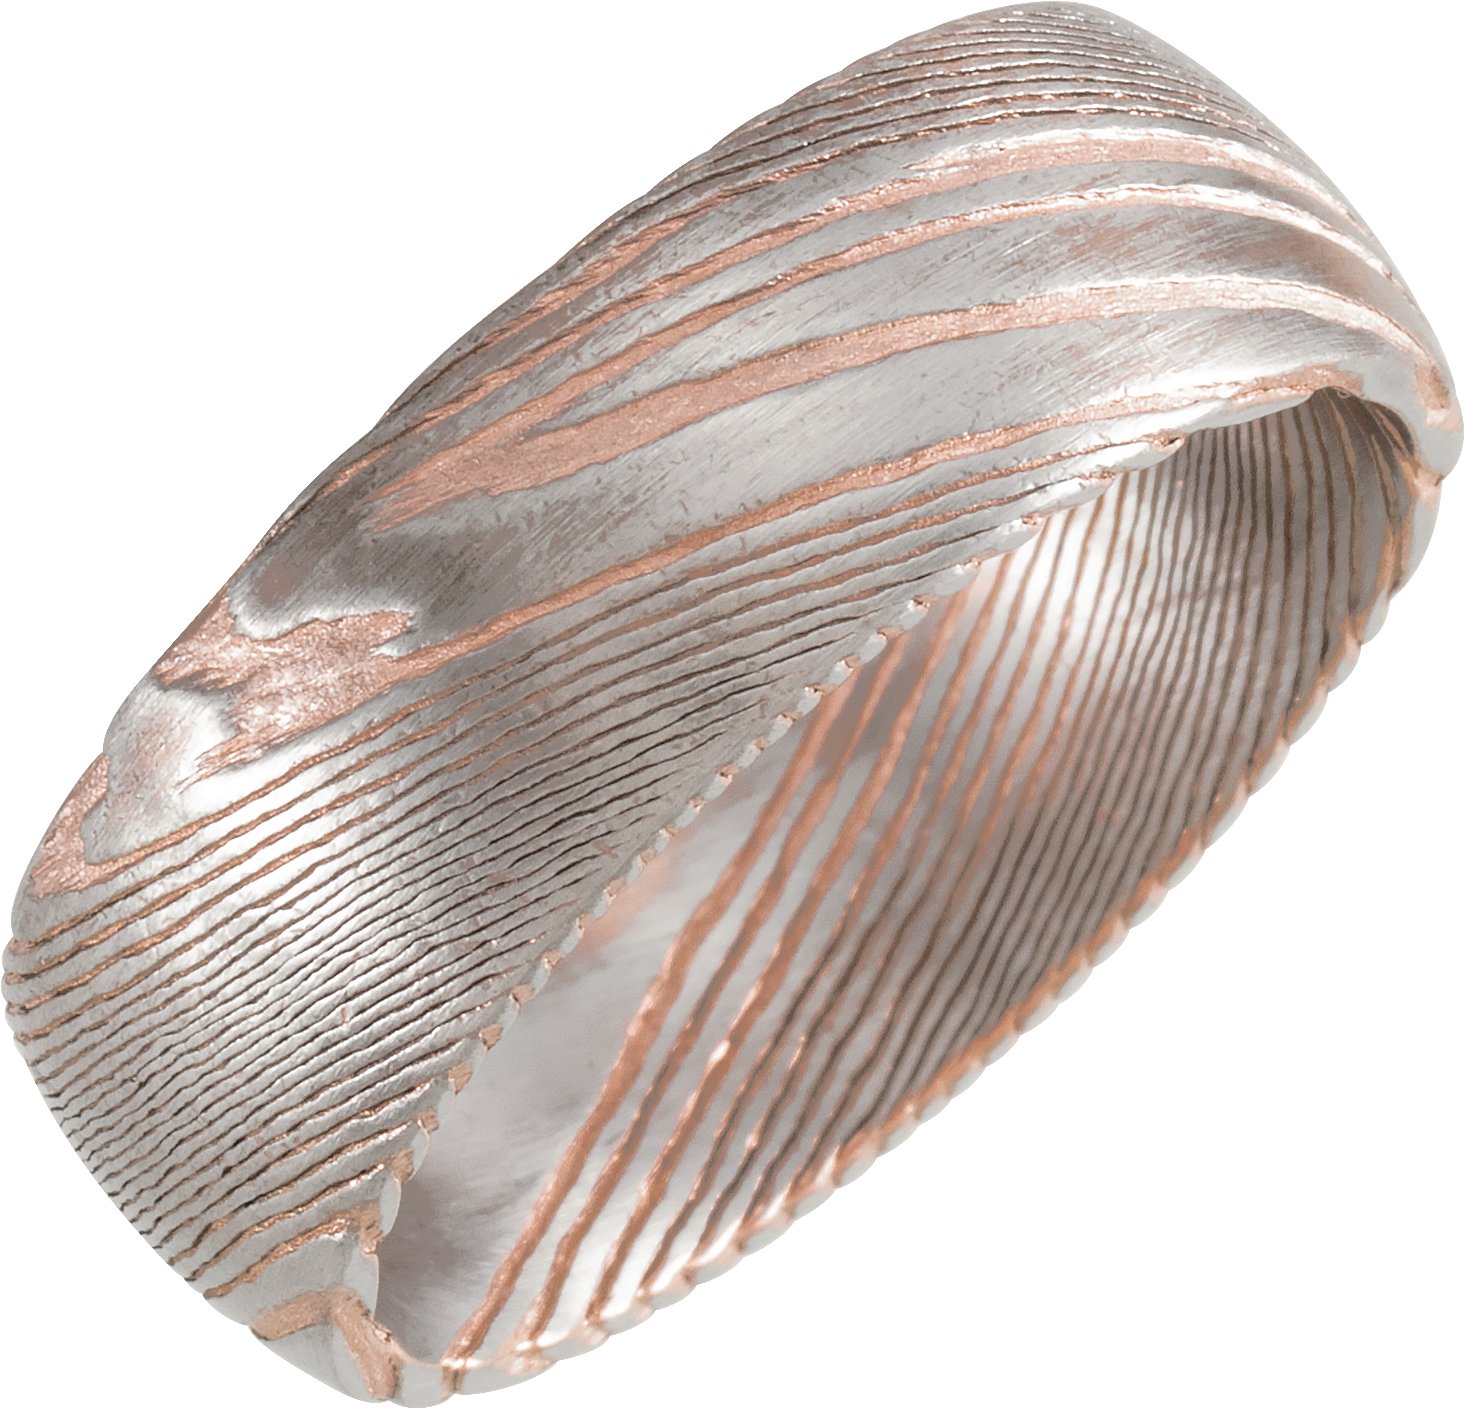 18K Rose Gold PVD Damascus Steel 8 mm Patterned Half Round Band Size 8.5 Ref 16549624